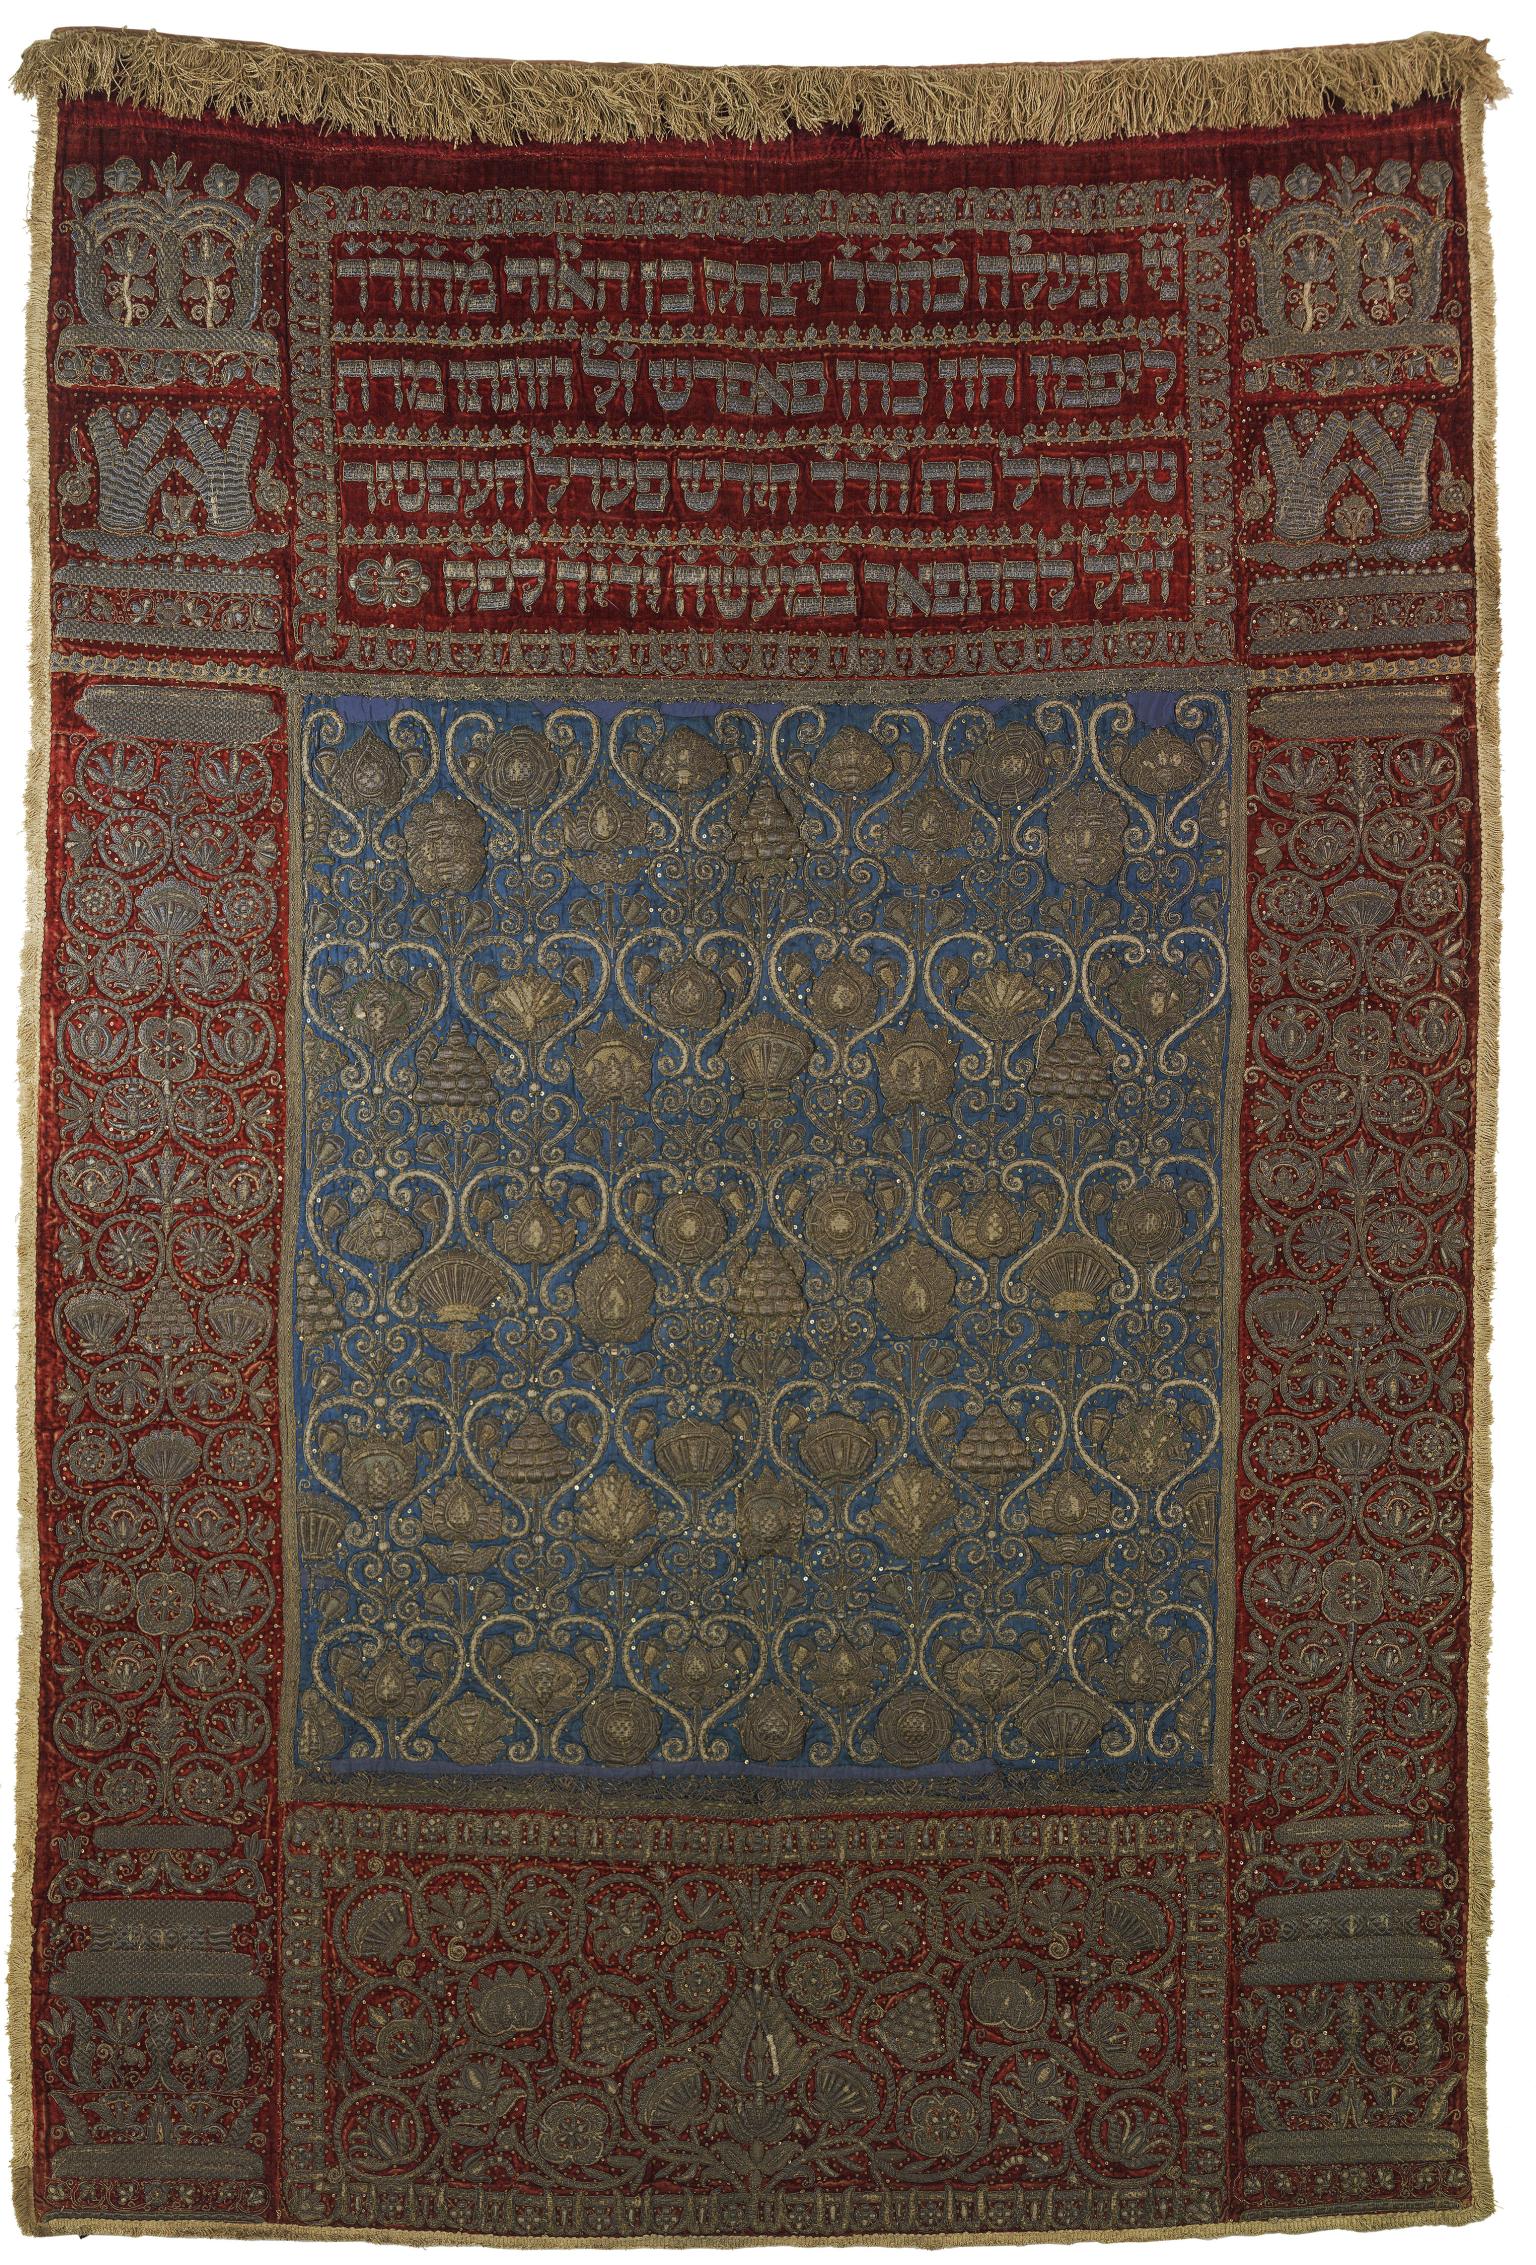 Cloth embroidered with floral border, Hebrew text across the top, and repeating motif in center. 